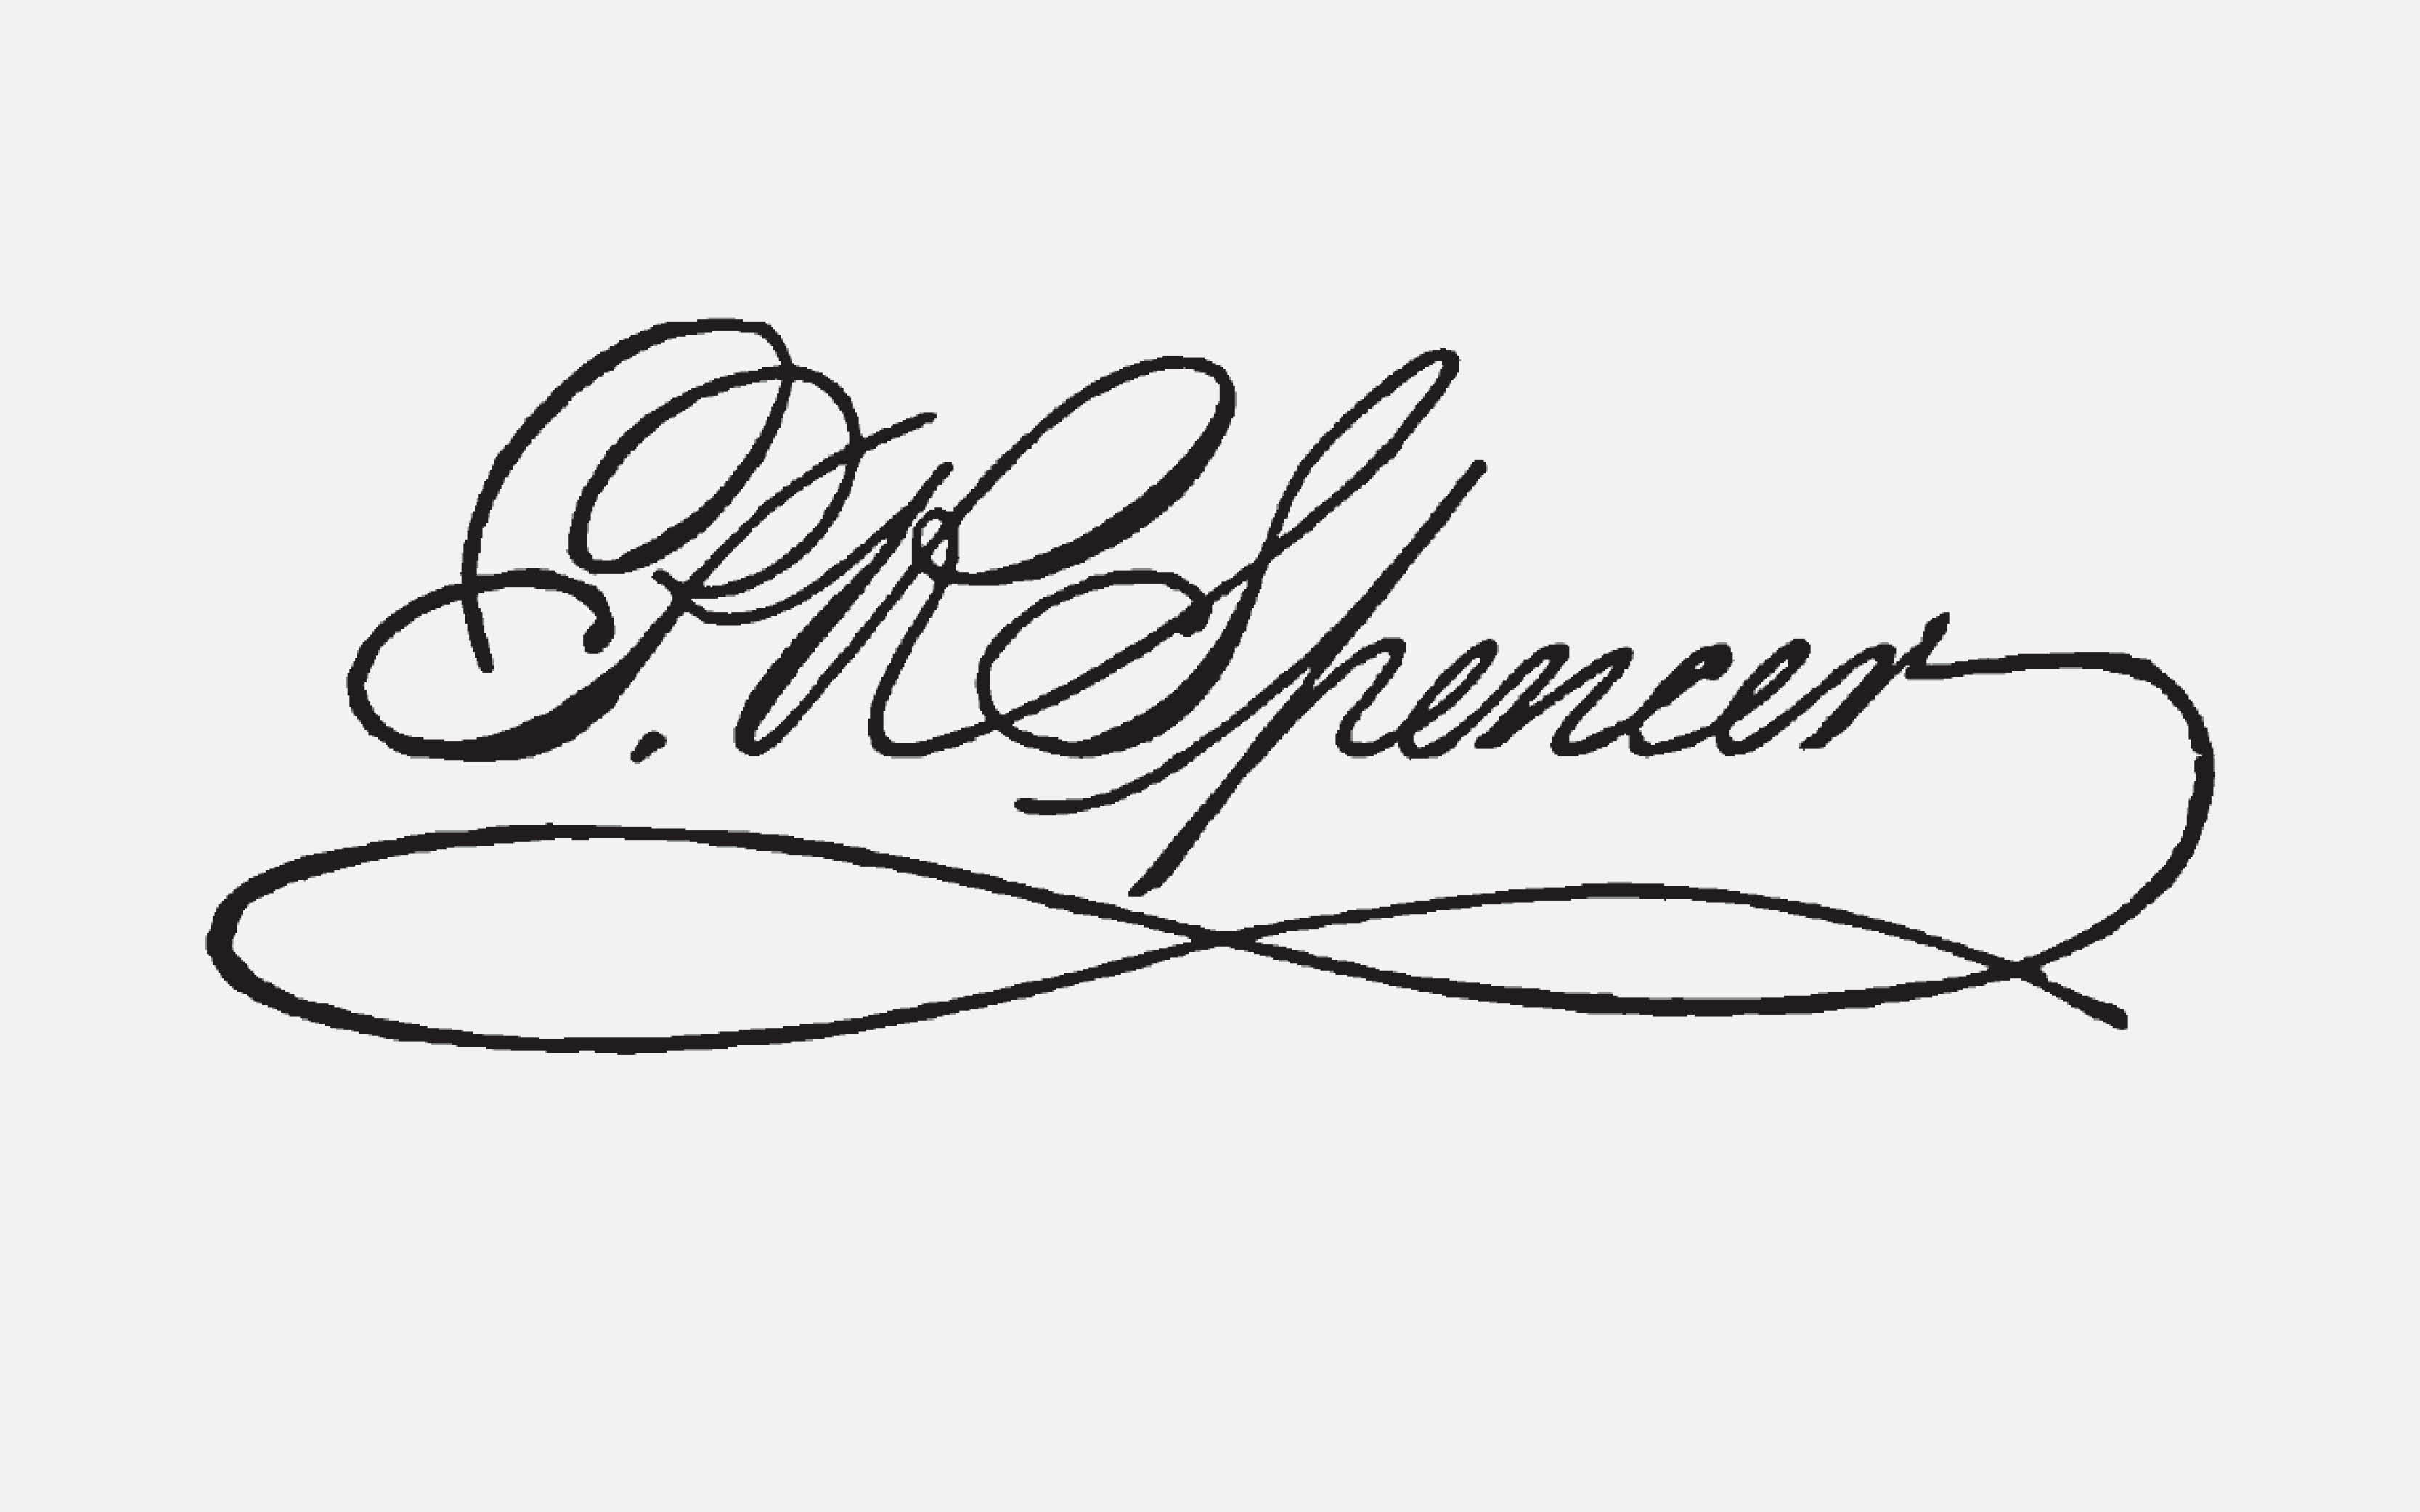 Spencer signature is already the perfect example of Spencerian script style.